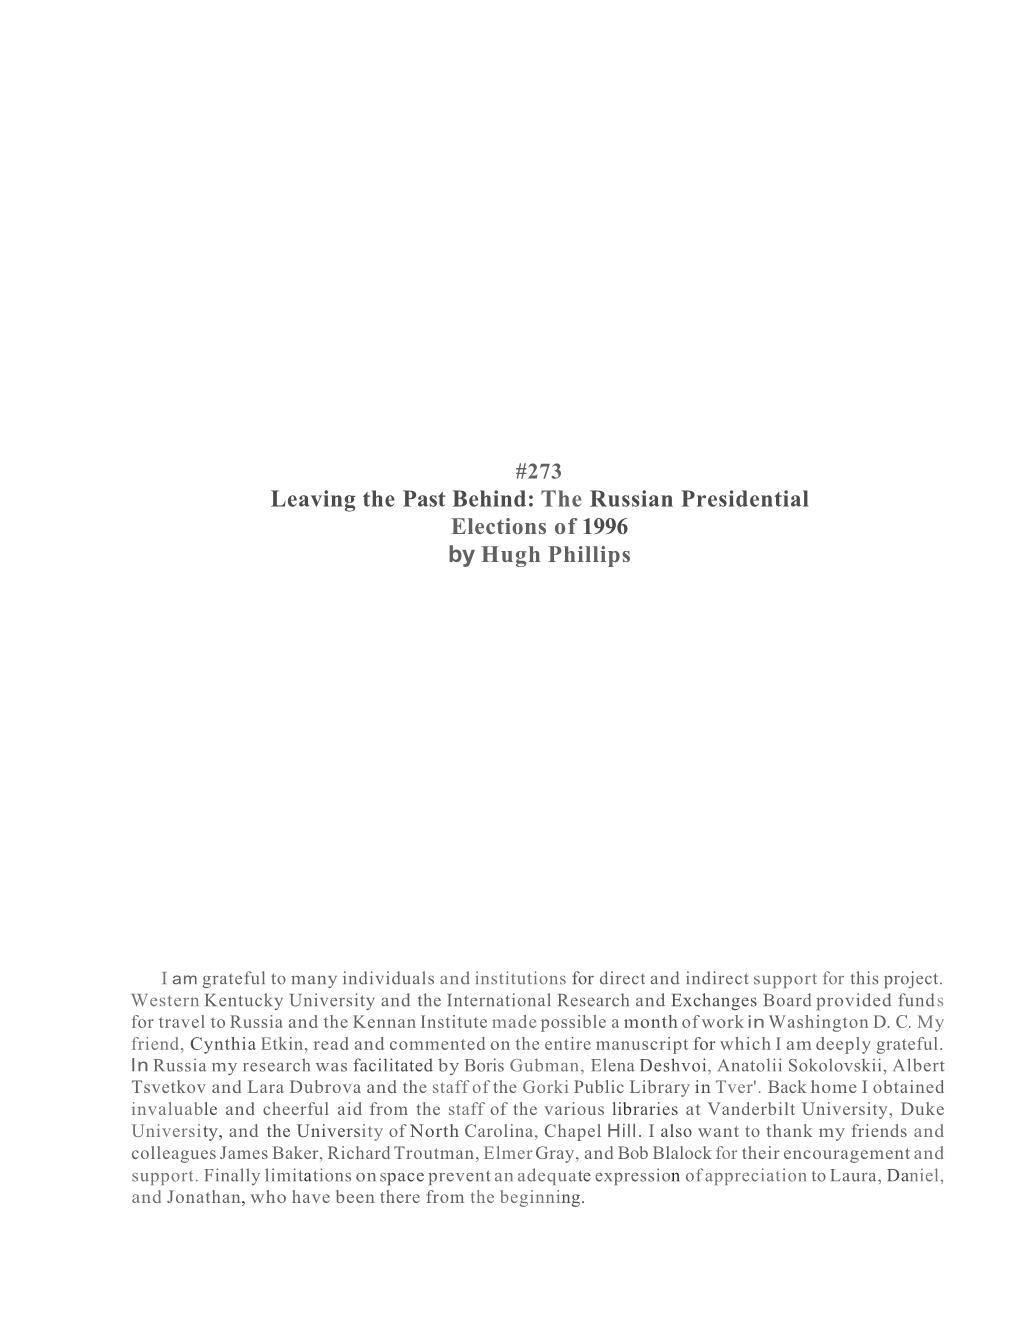 Leaving the Past Behind: the Russian Presidential Elections of 1996 by Hugh Phillips